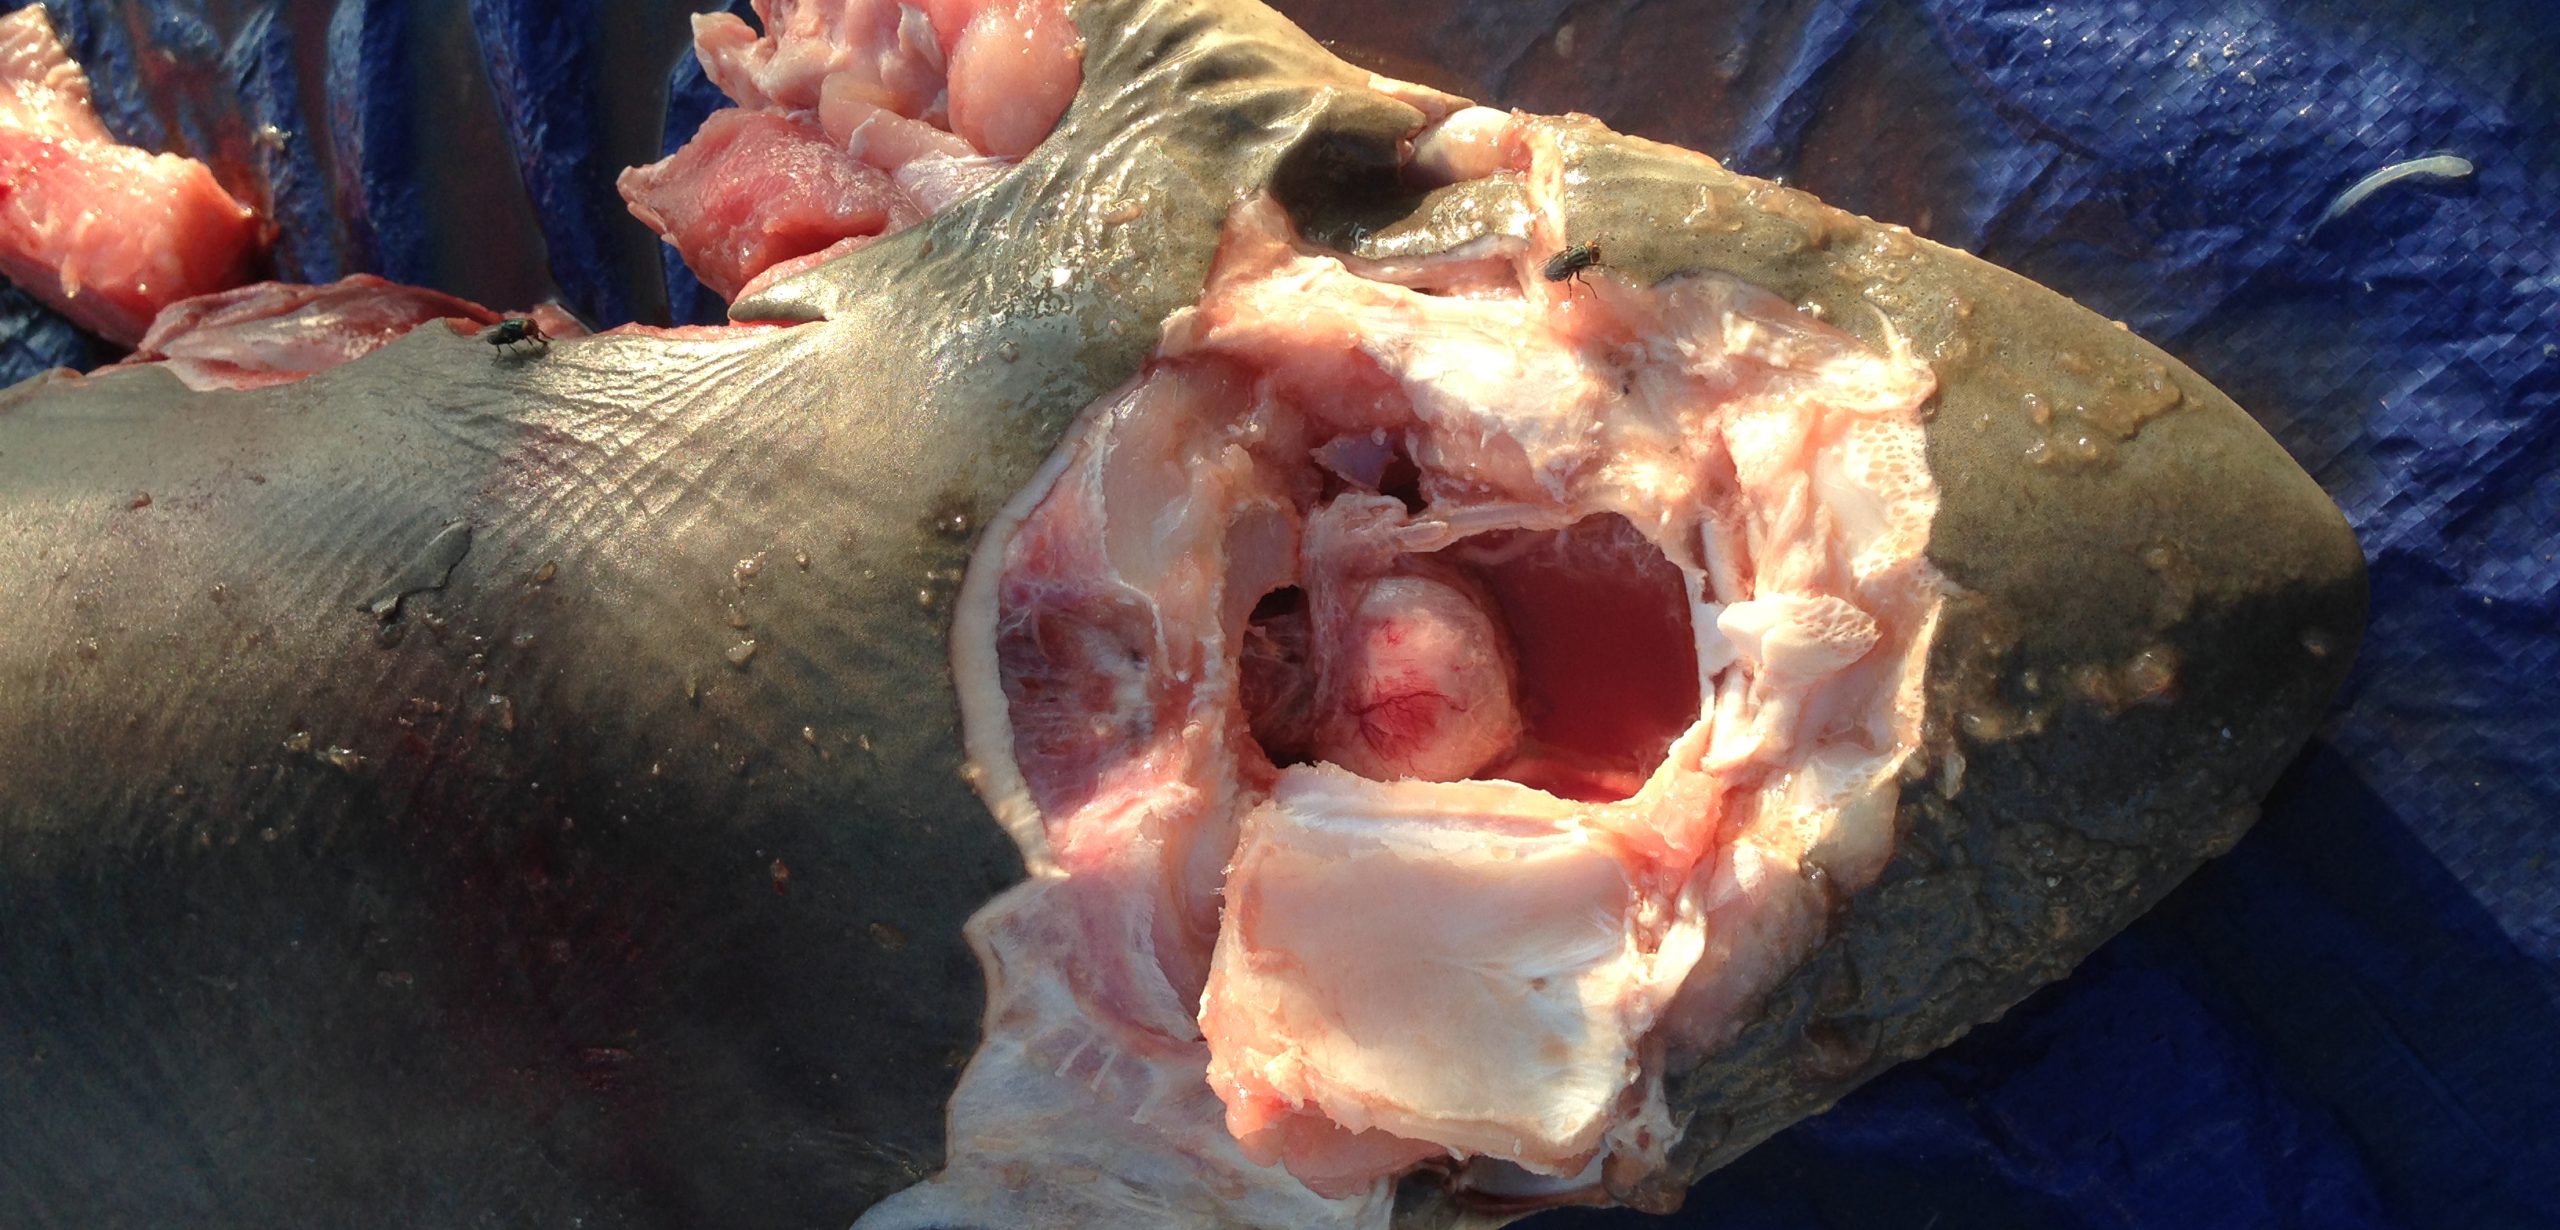 The skull and brain of one of the four salvaged blacktip sharks, post-dissection. Photo by David Shiffman